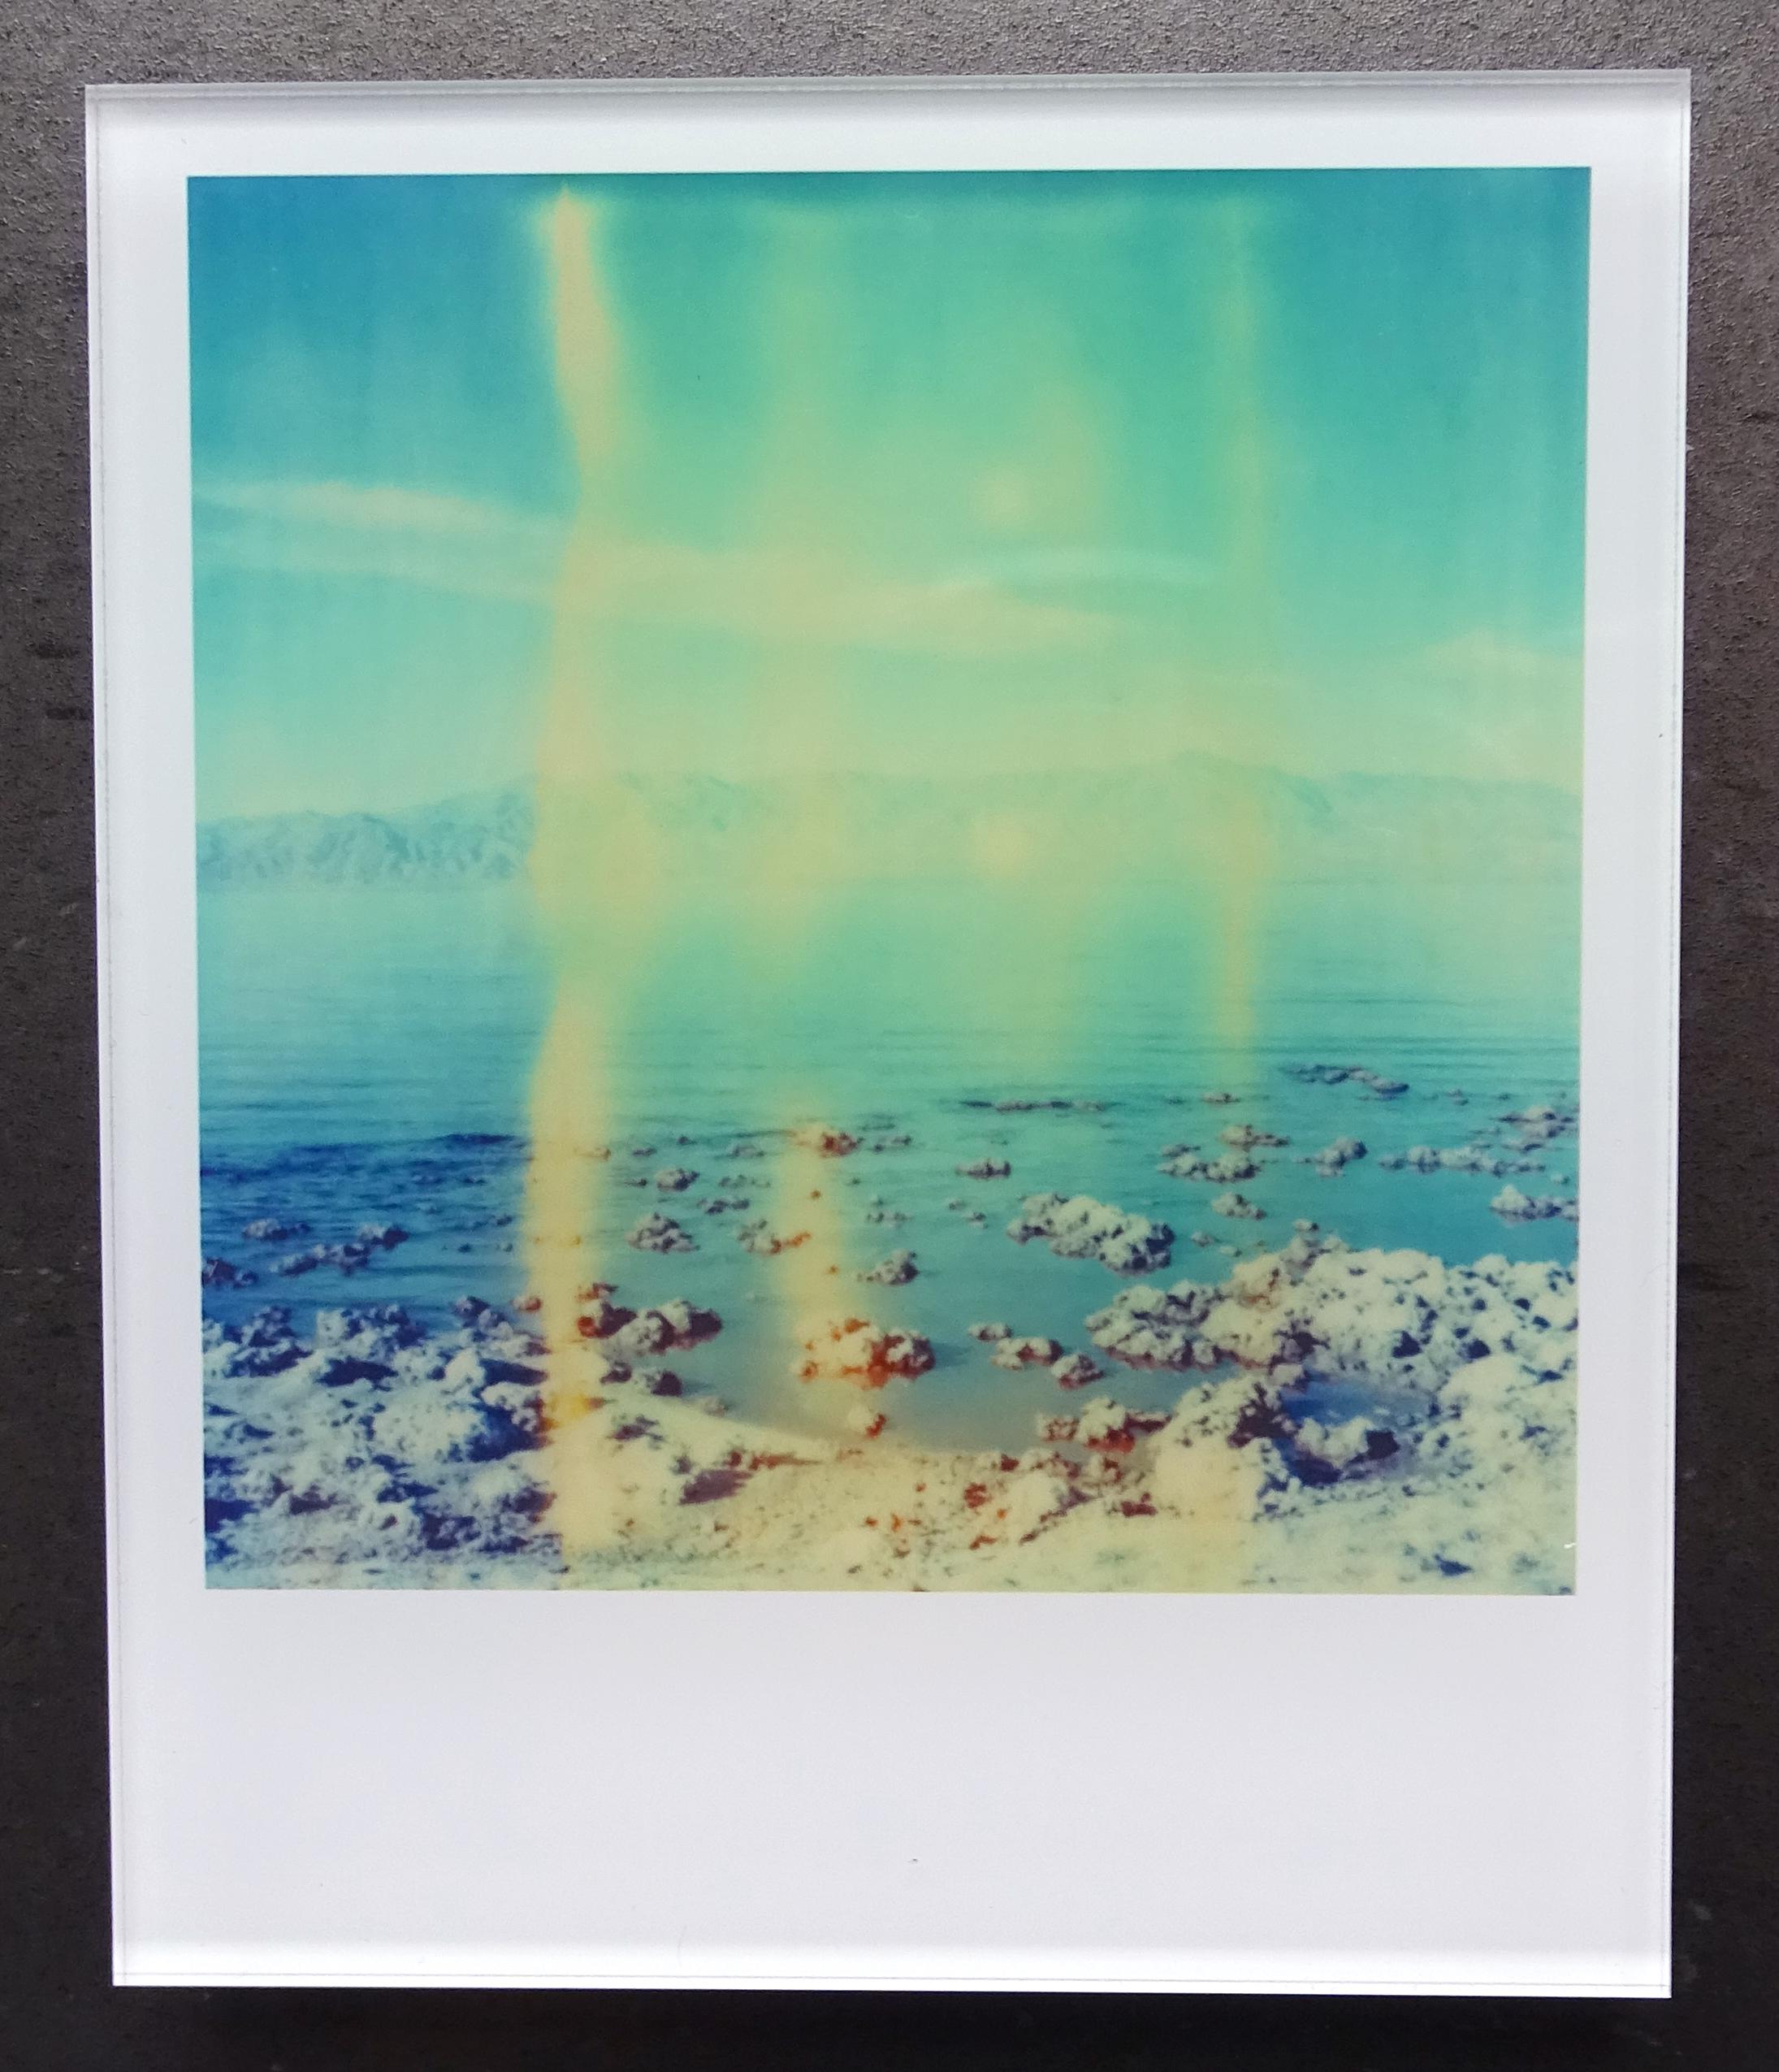 Stefanie Schneider's Minis
Salt'n Sea (California Badlands) - 2010

Signed and signature brand on verso.
Lambda digital Color Photographs based on the Polaroid.
Sandwiched in between Plexiglass (thickness 0.7cm)

Polaroid sized open Editions